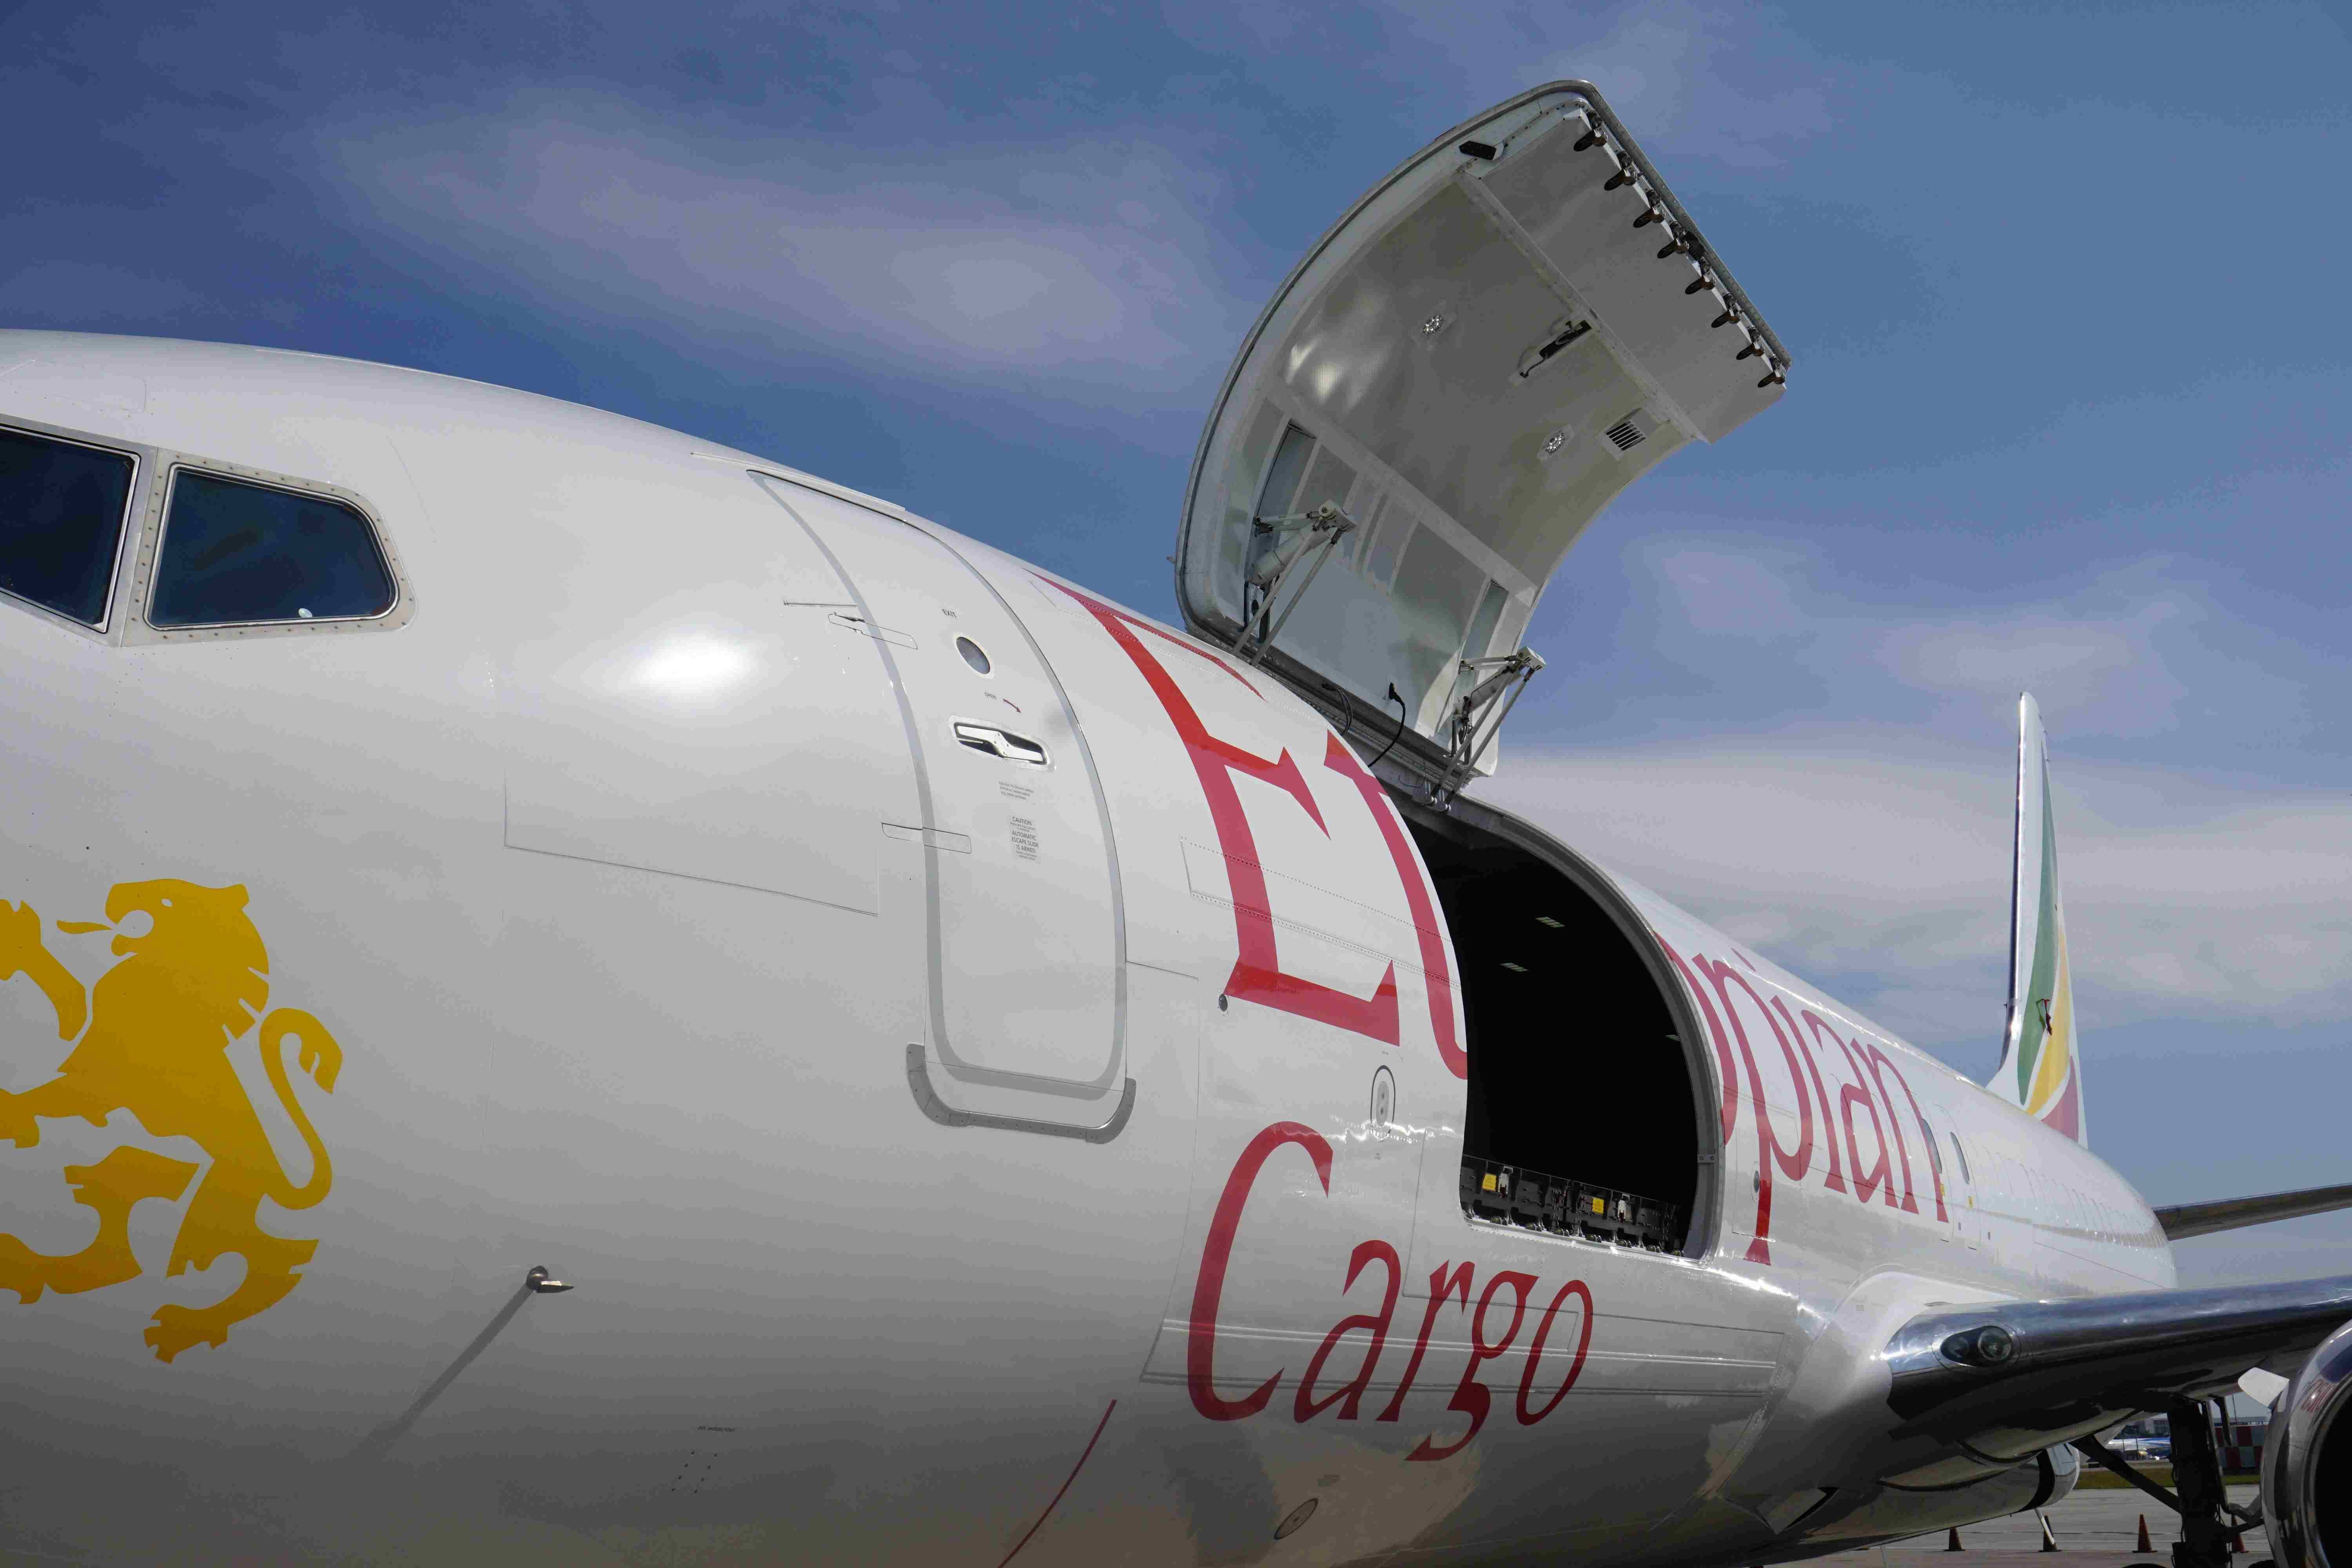 The Perfect Fit: The cargo operators' hunt for the 'just-right' P2F